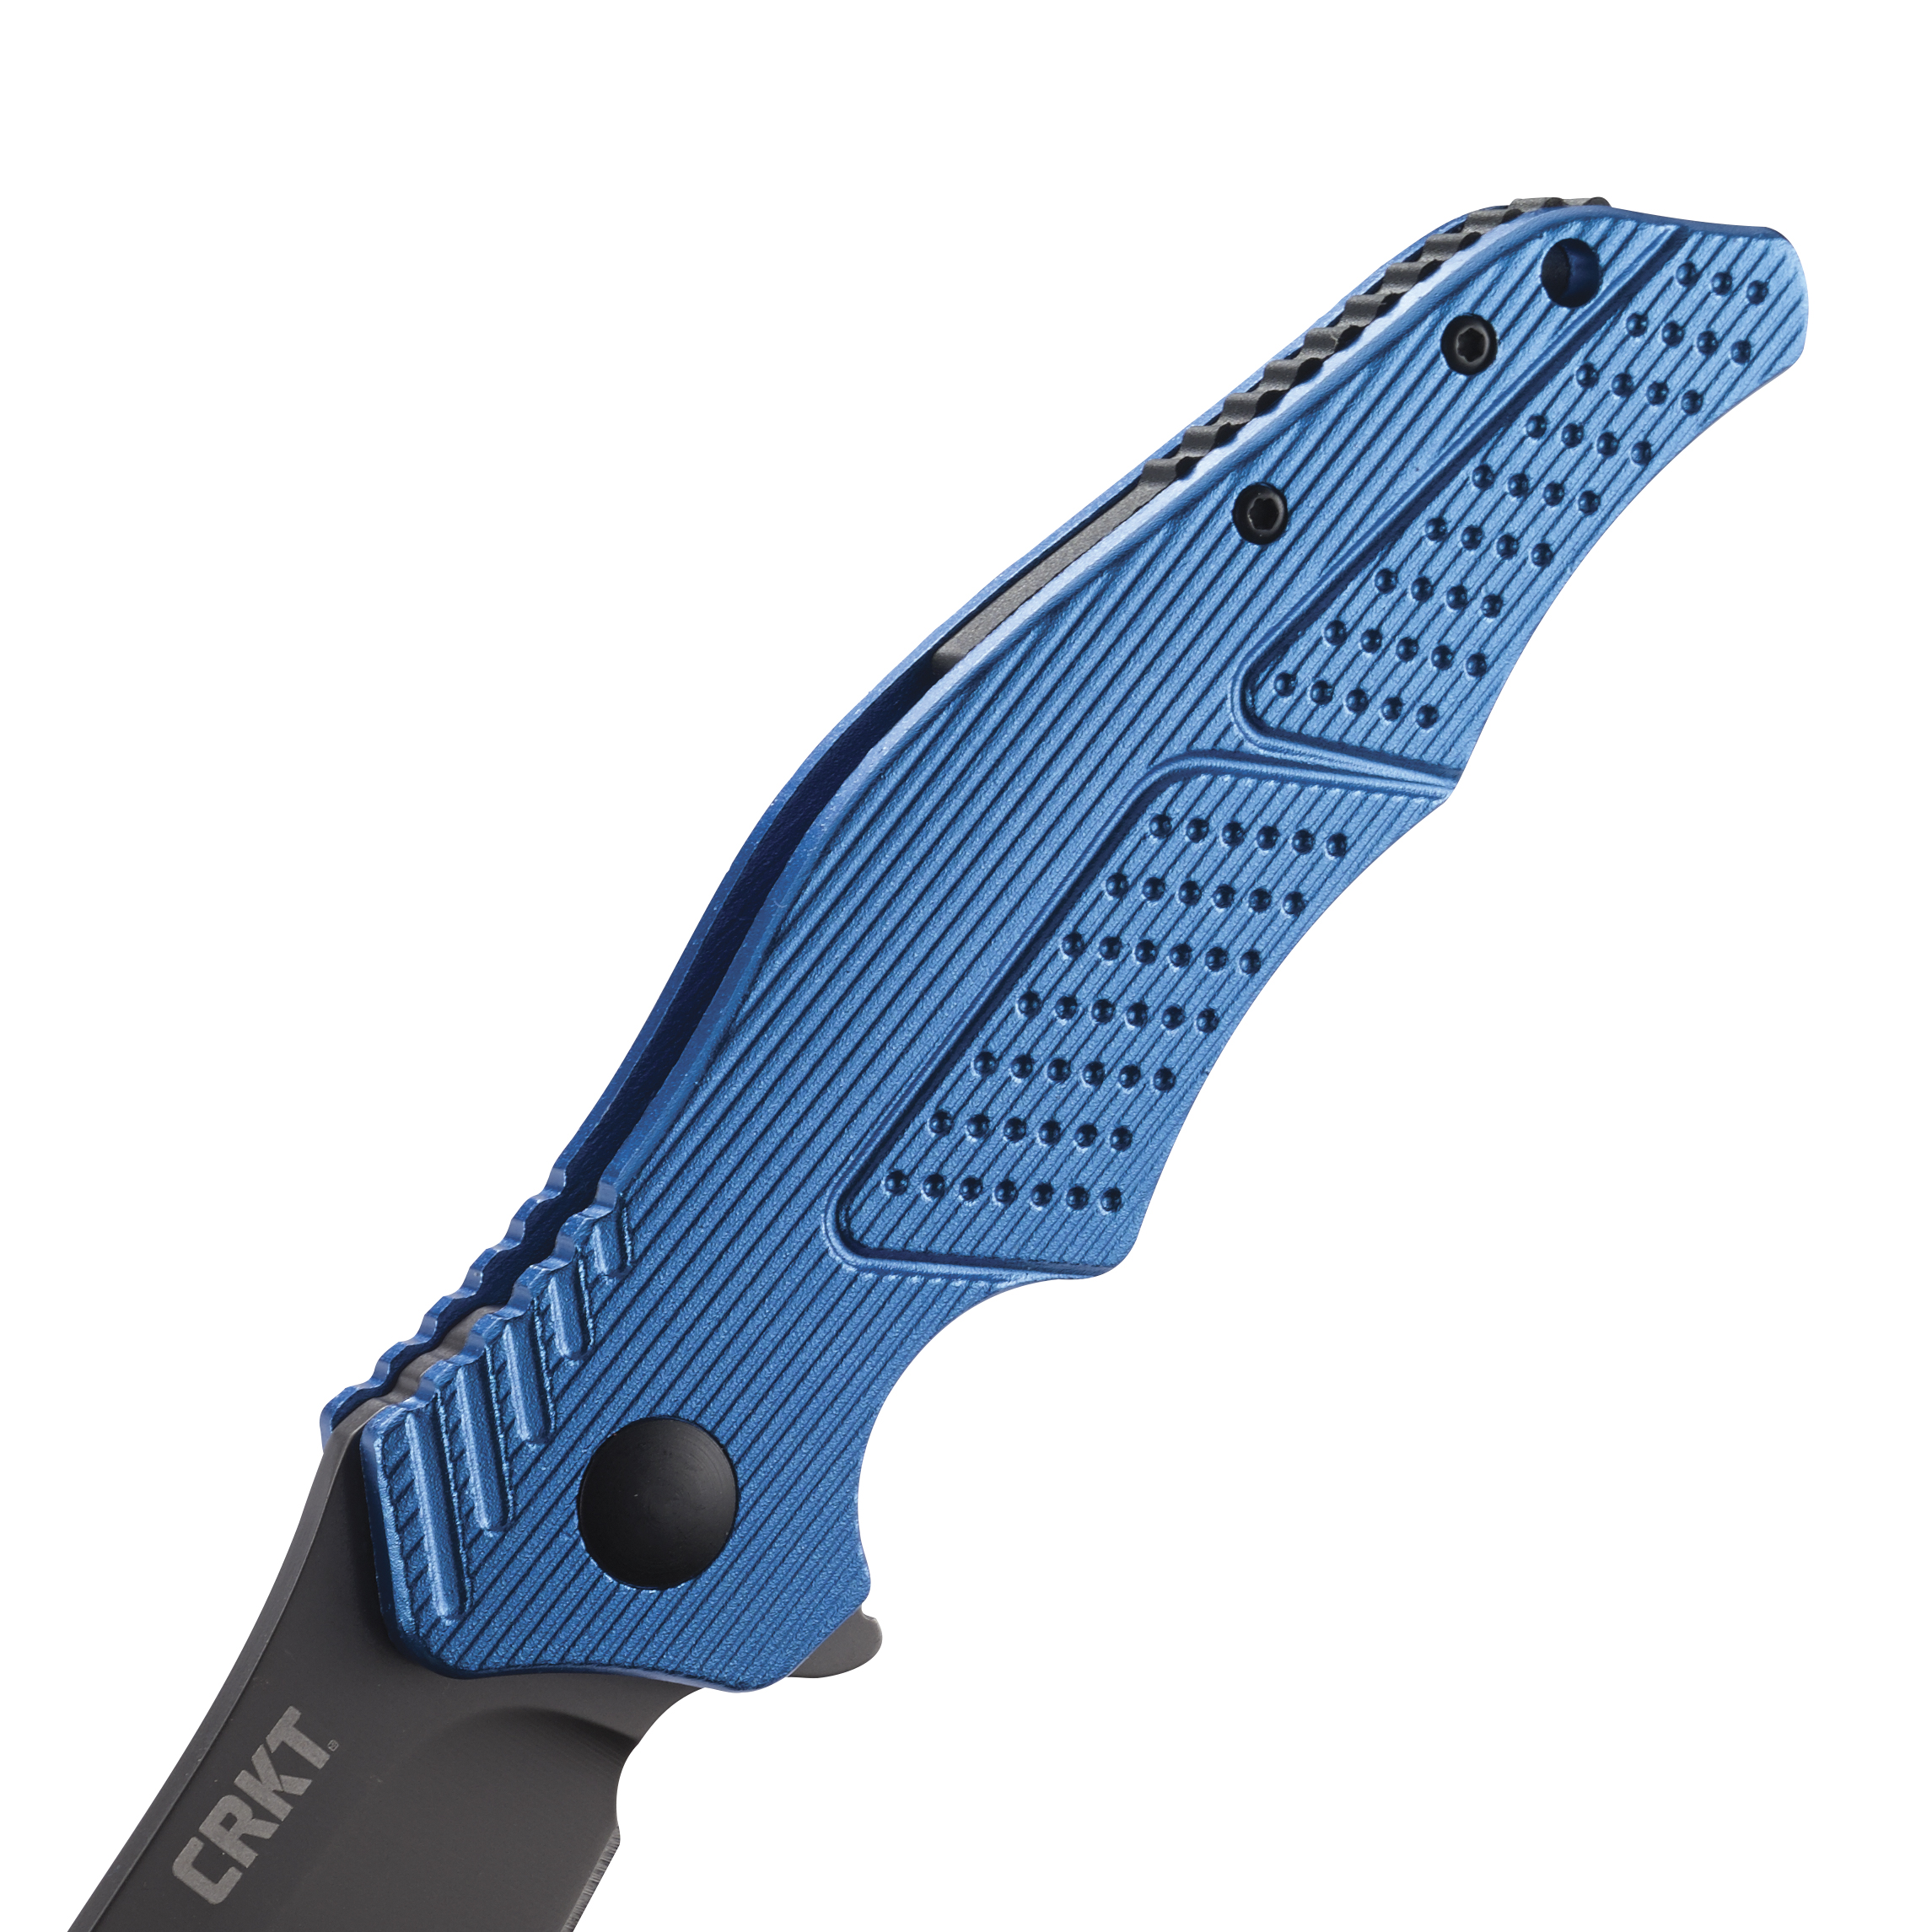 Cornwell® Quality Tools and CRKT®  limited edition Ken Onion designed Outrage™.